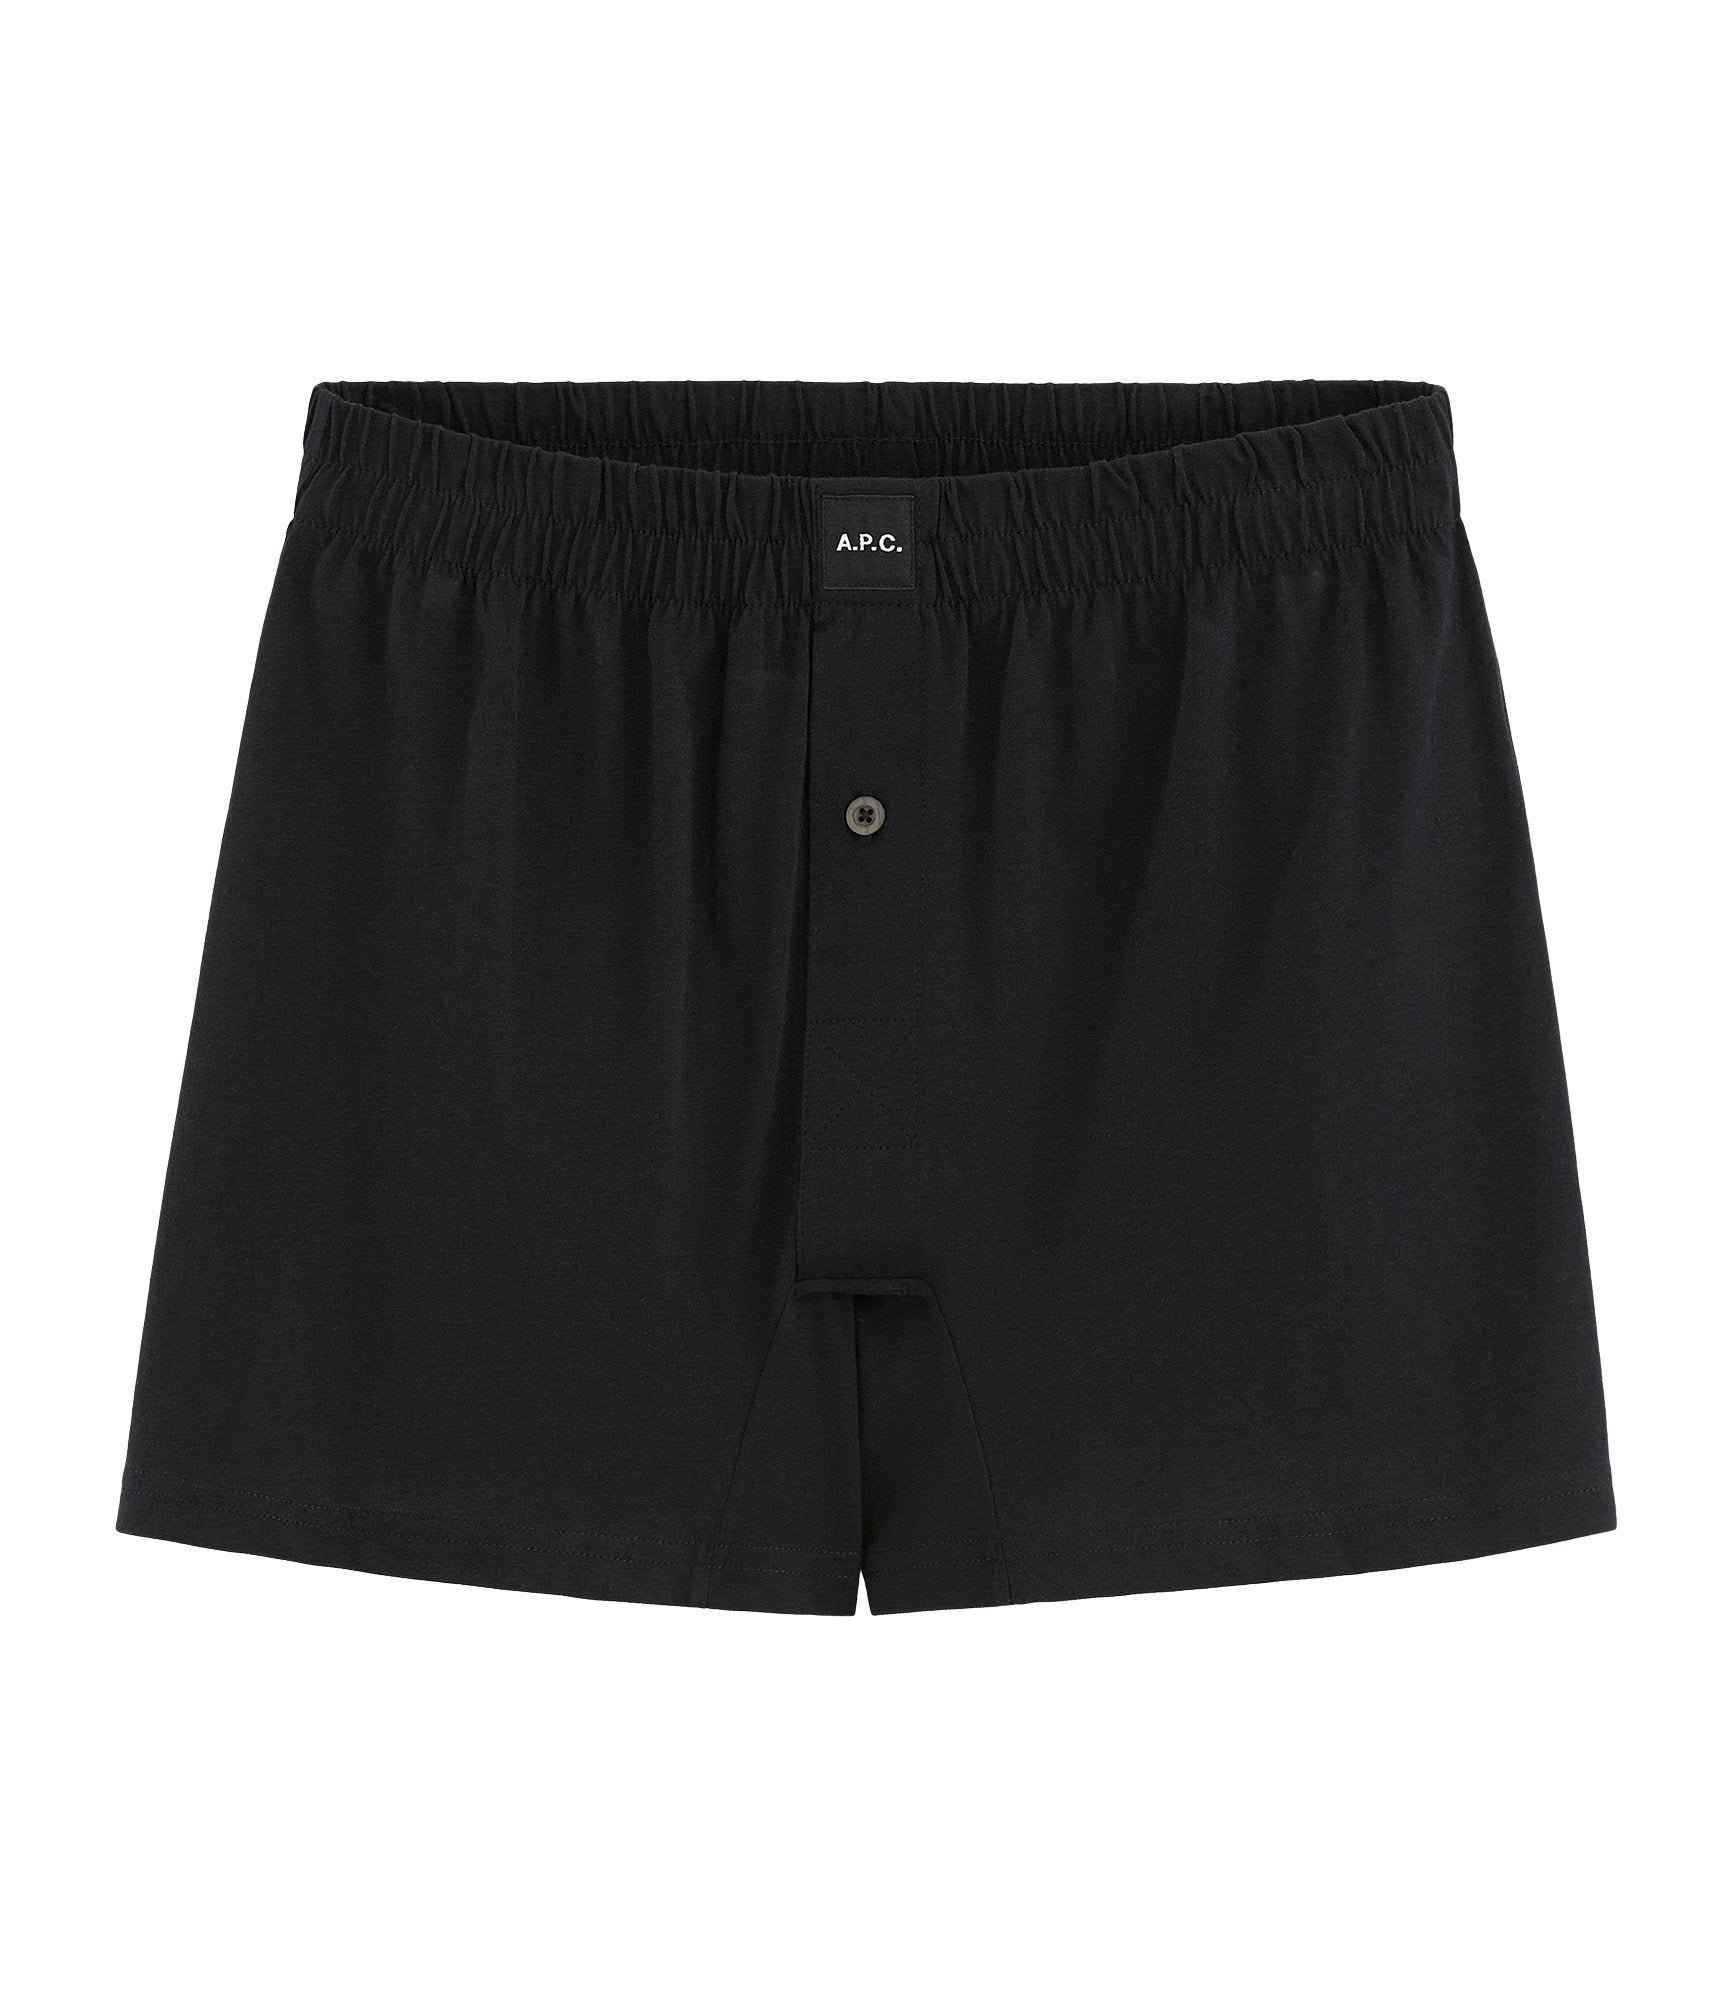 A. P.C. - Cabourg Boxer Shorts